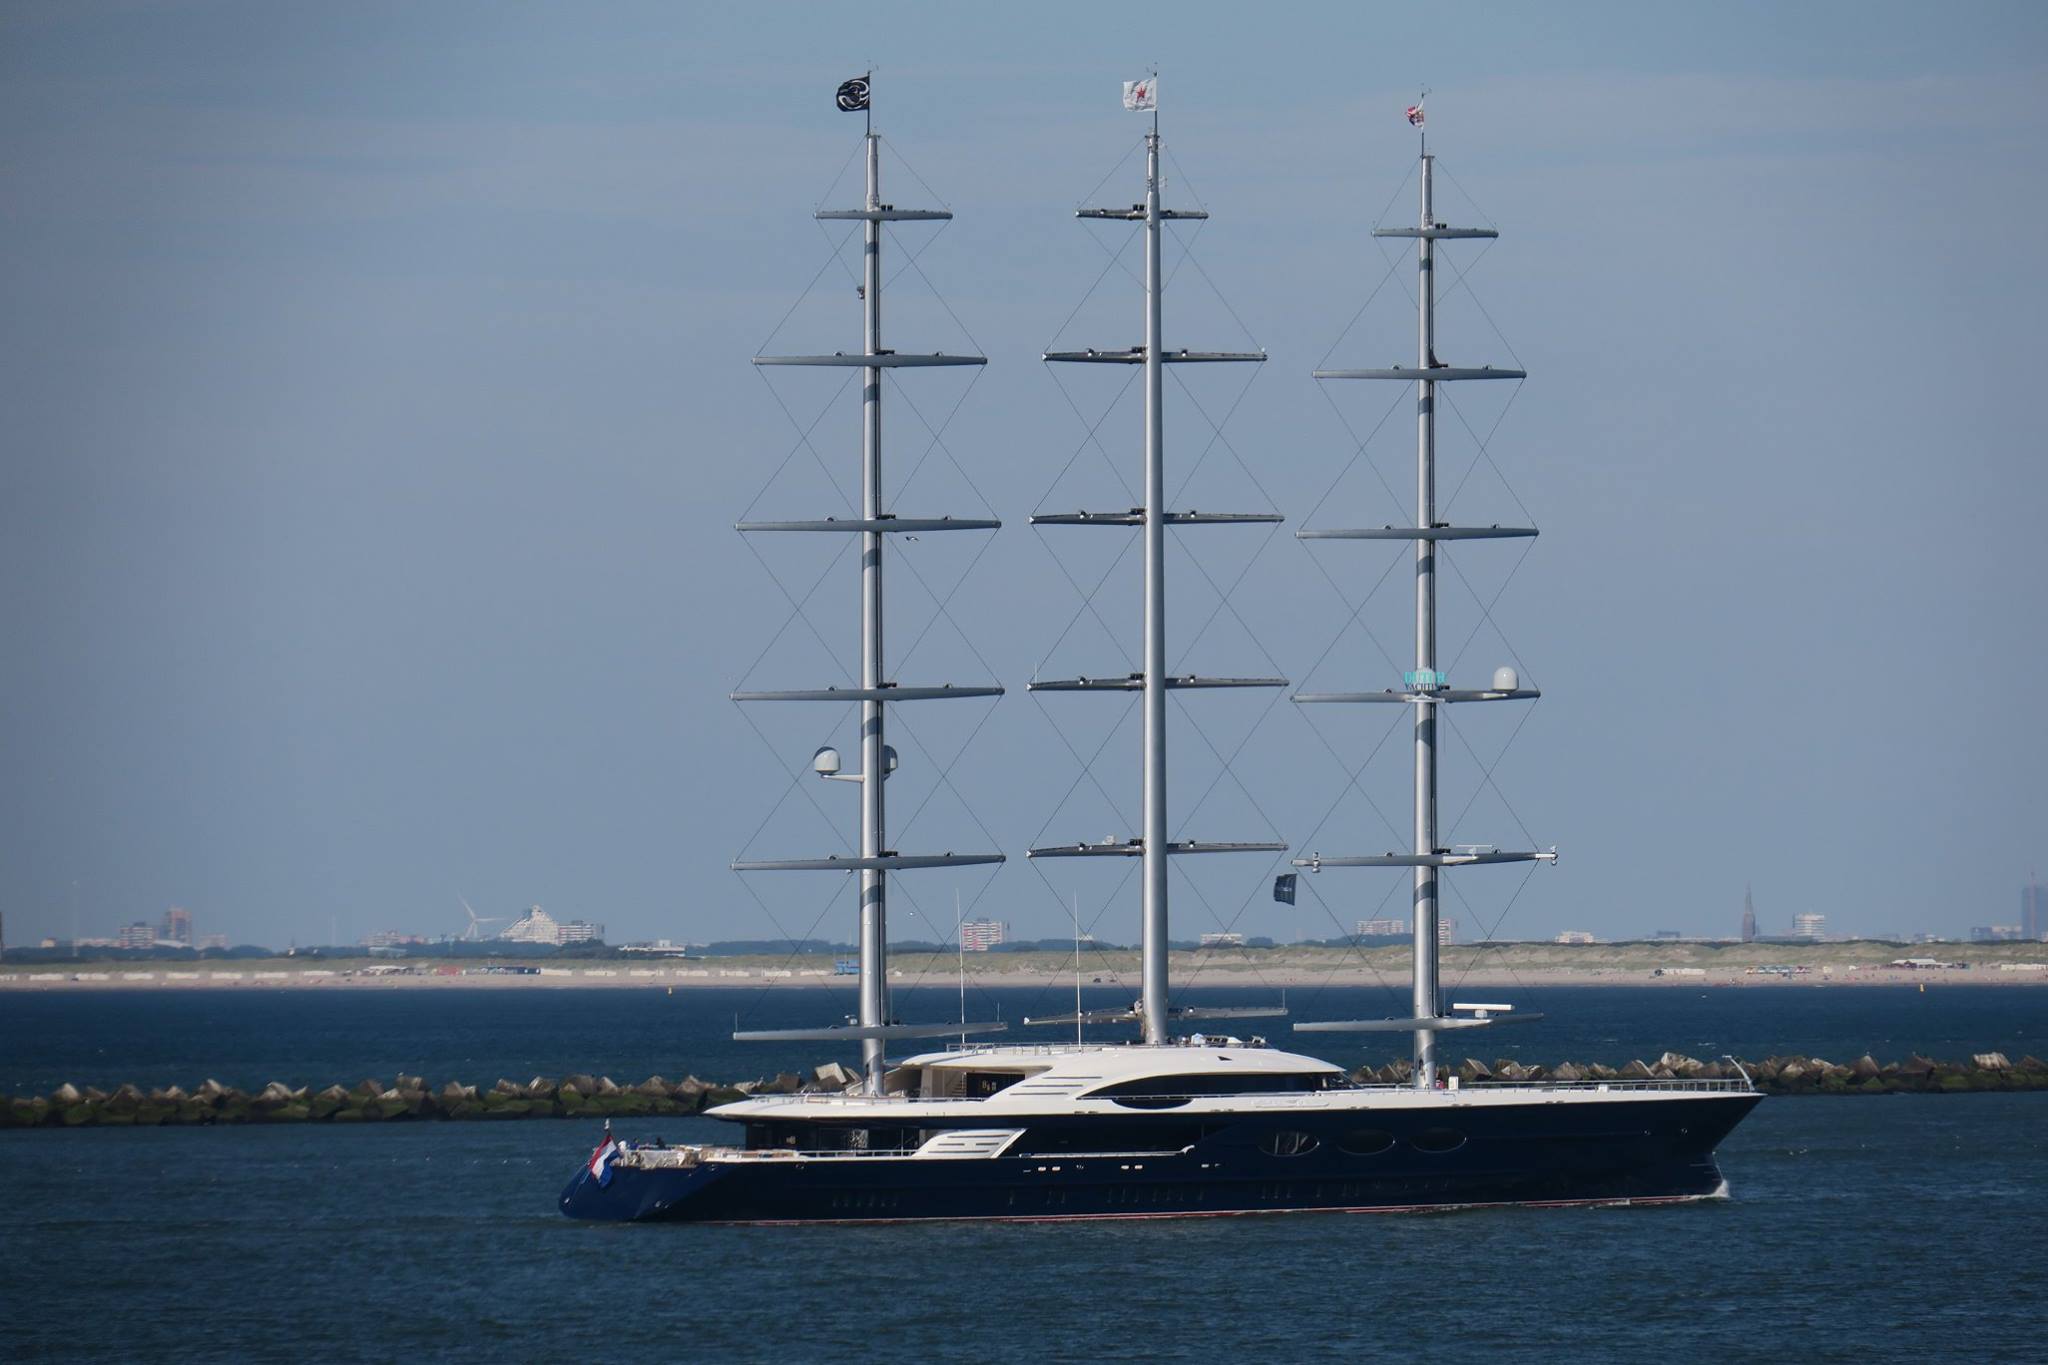 Black Pearl features 3 rotating masts, steel hull and 